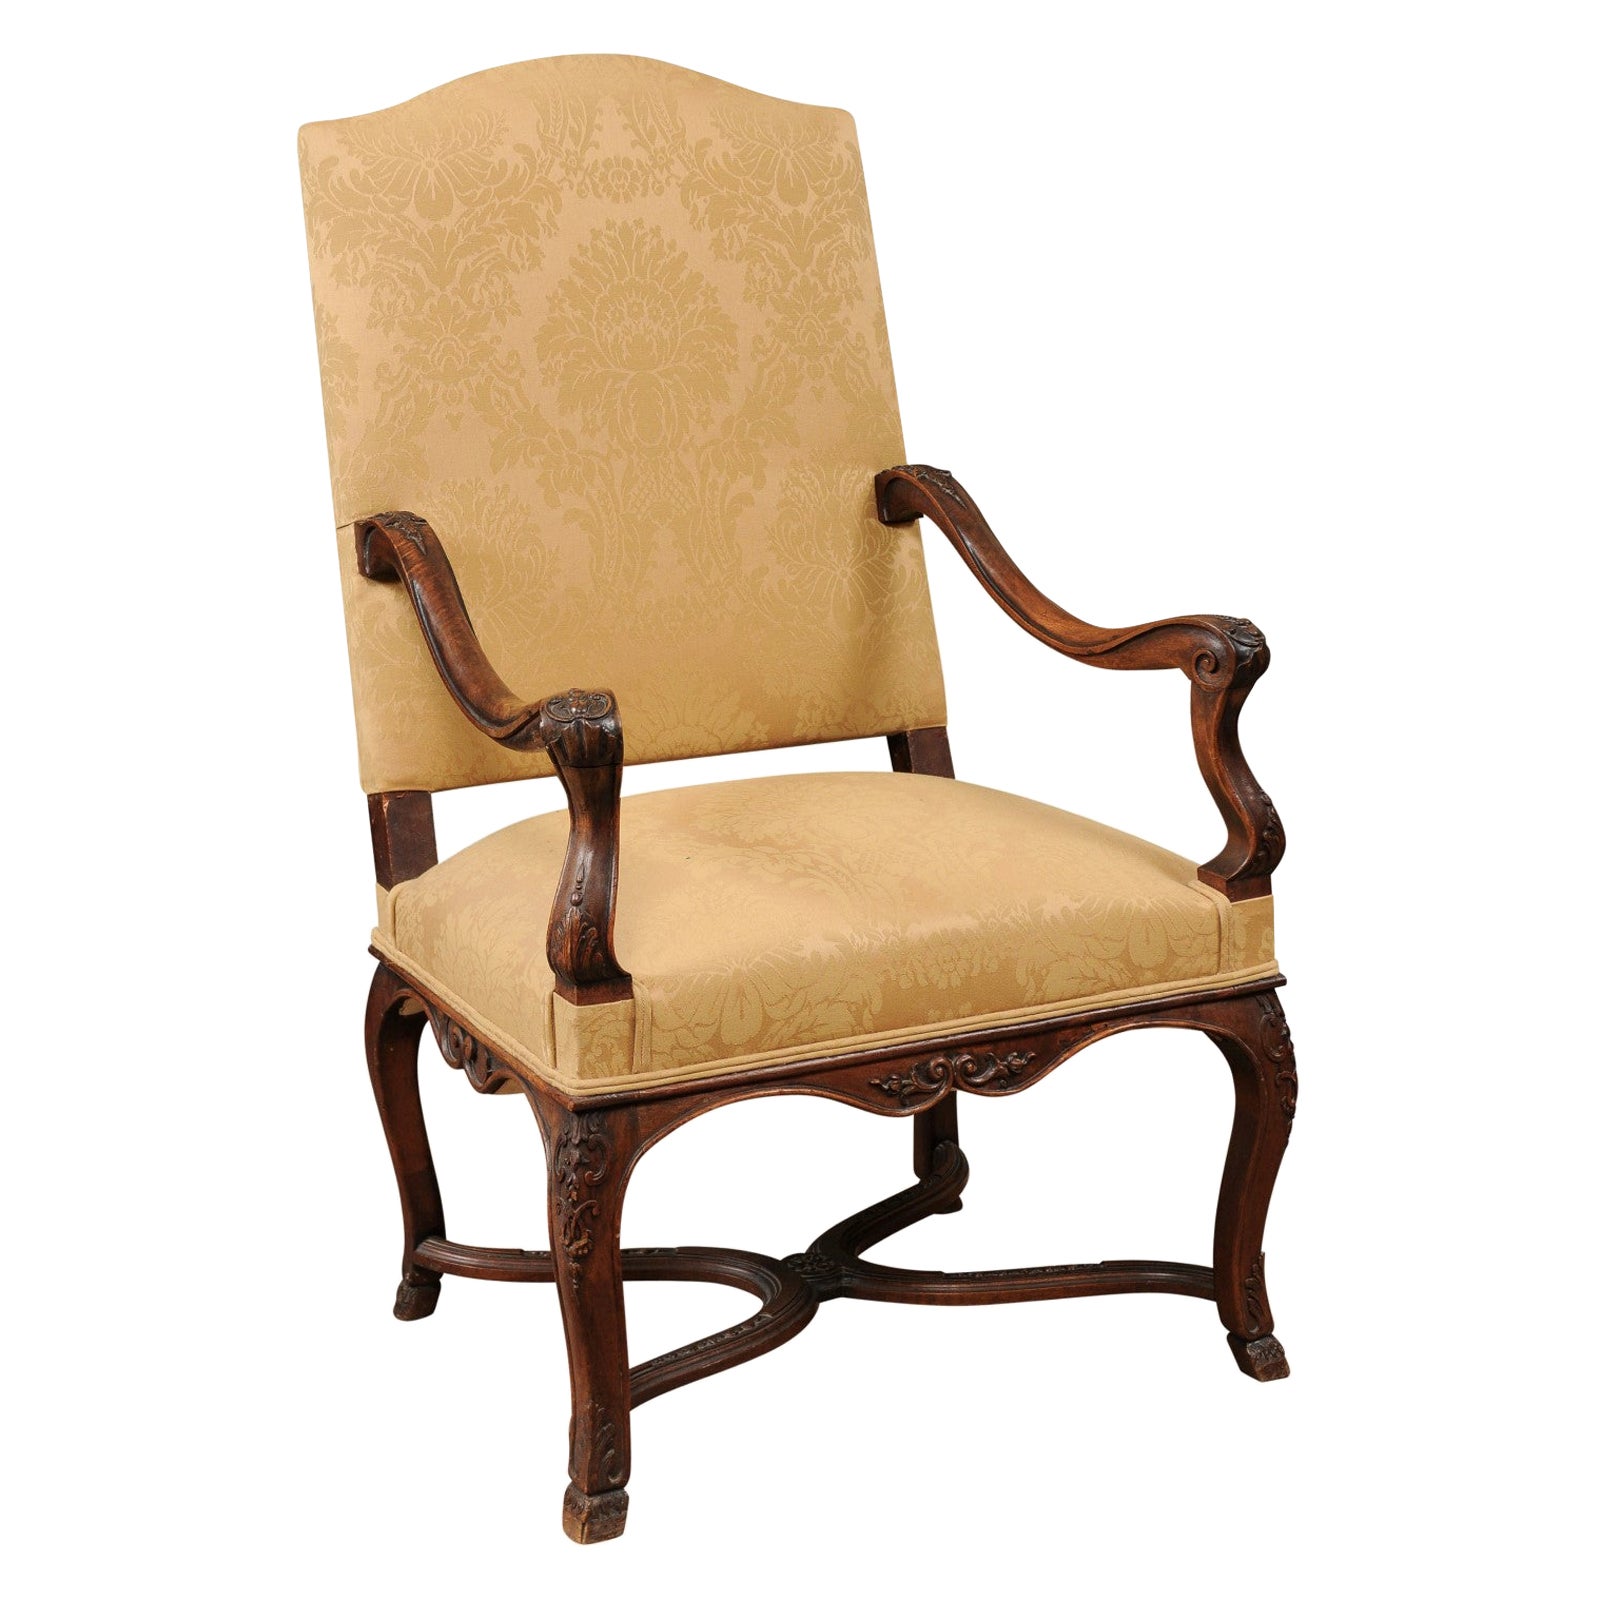 Regence Period Fauteuil in Walnut, France ca. 1720 For Sale